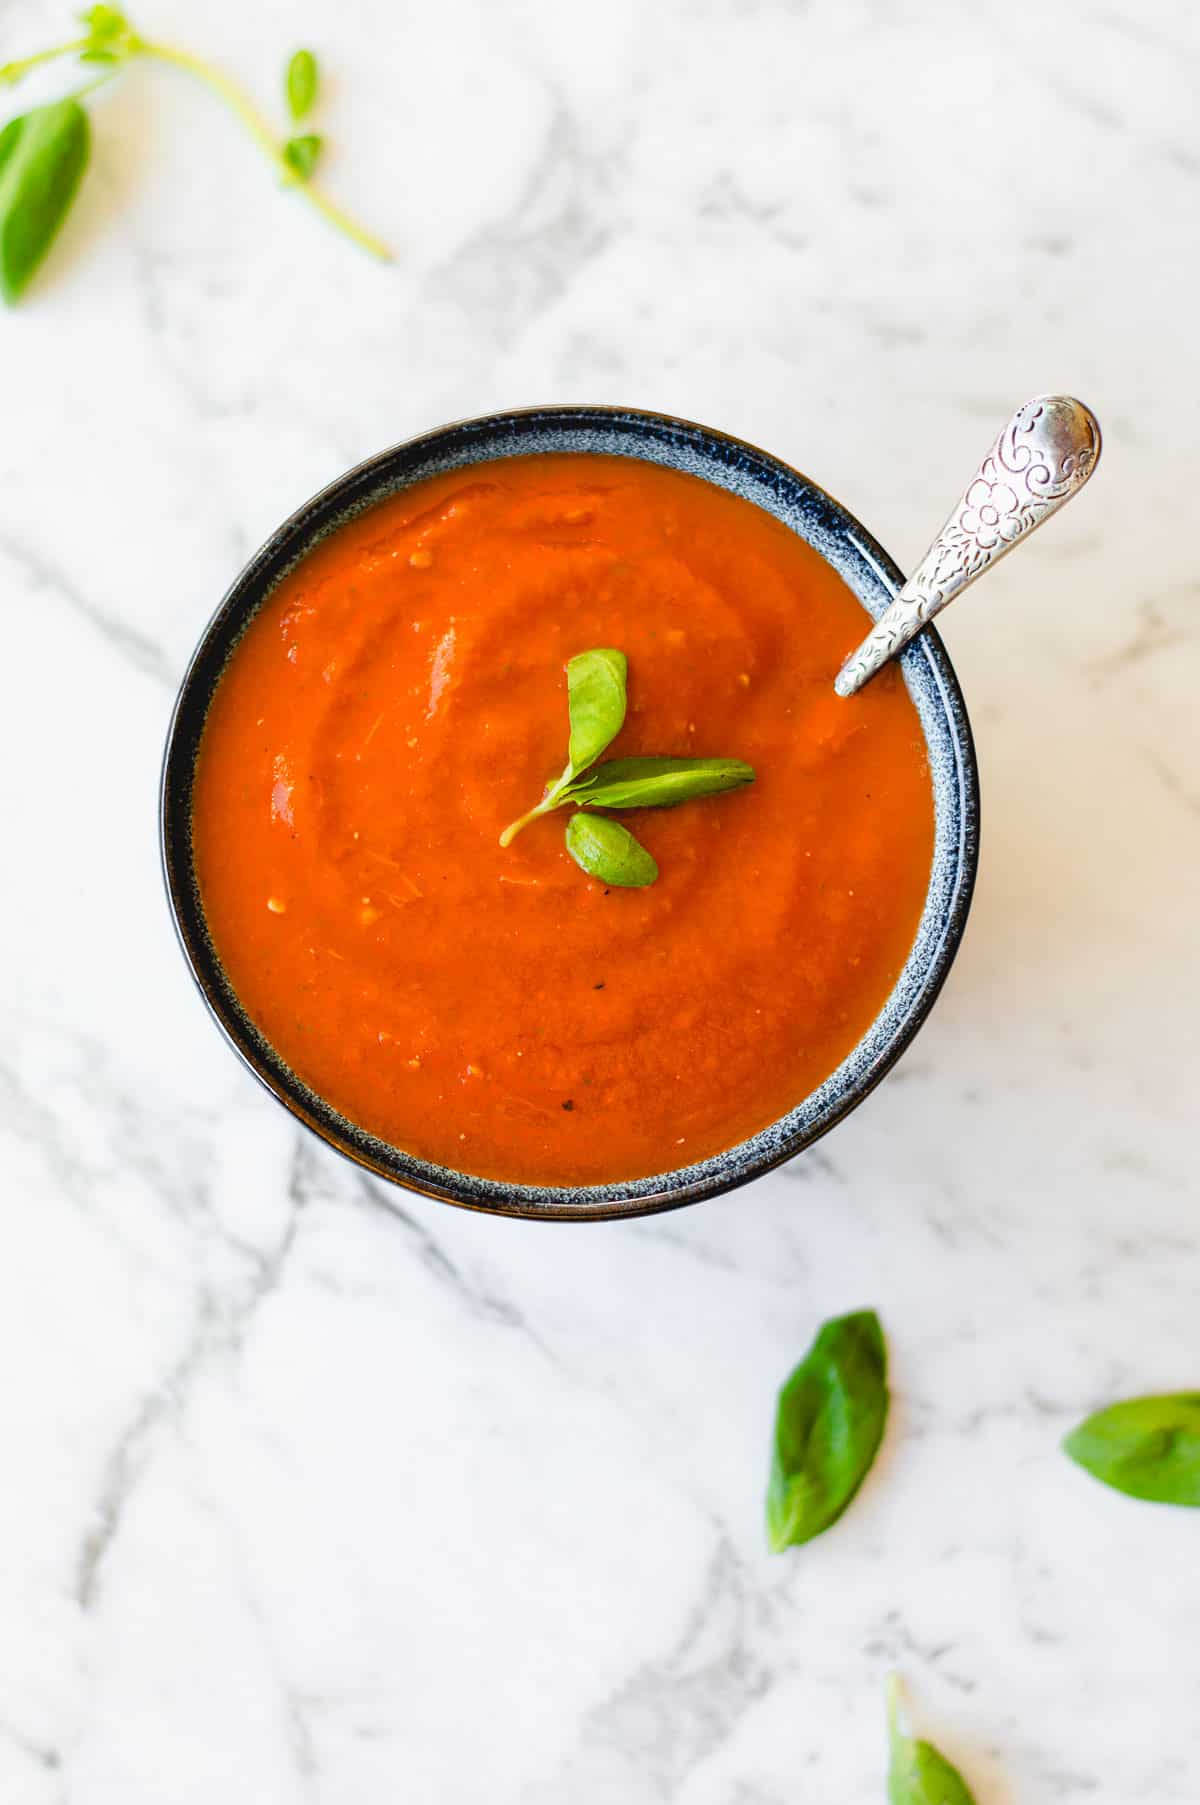 Tomato soup garnished with basil in a blue bowl.